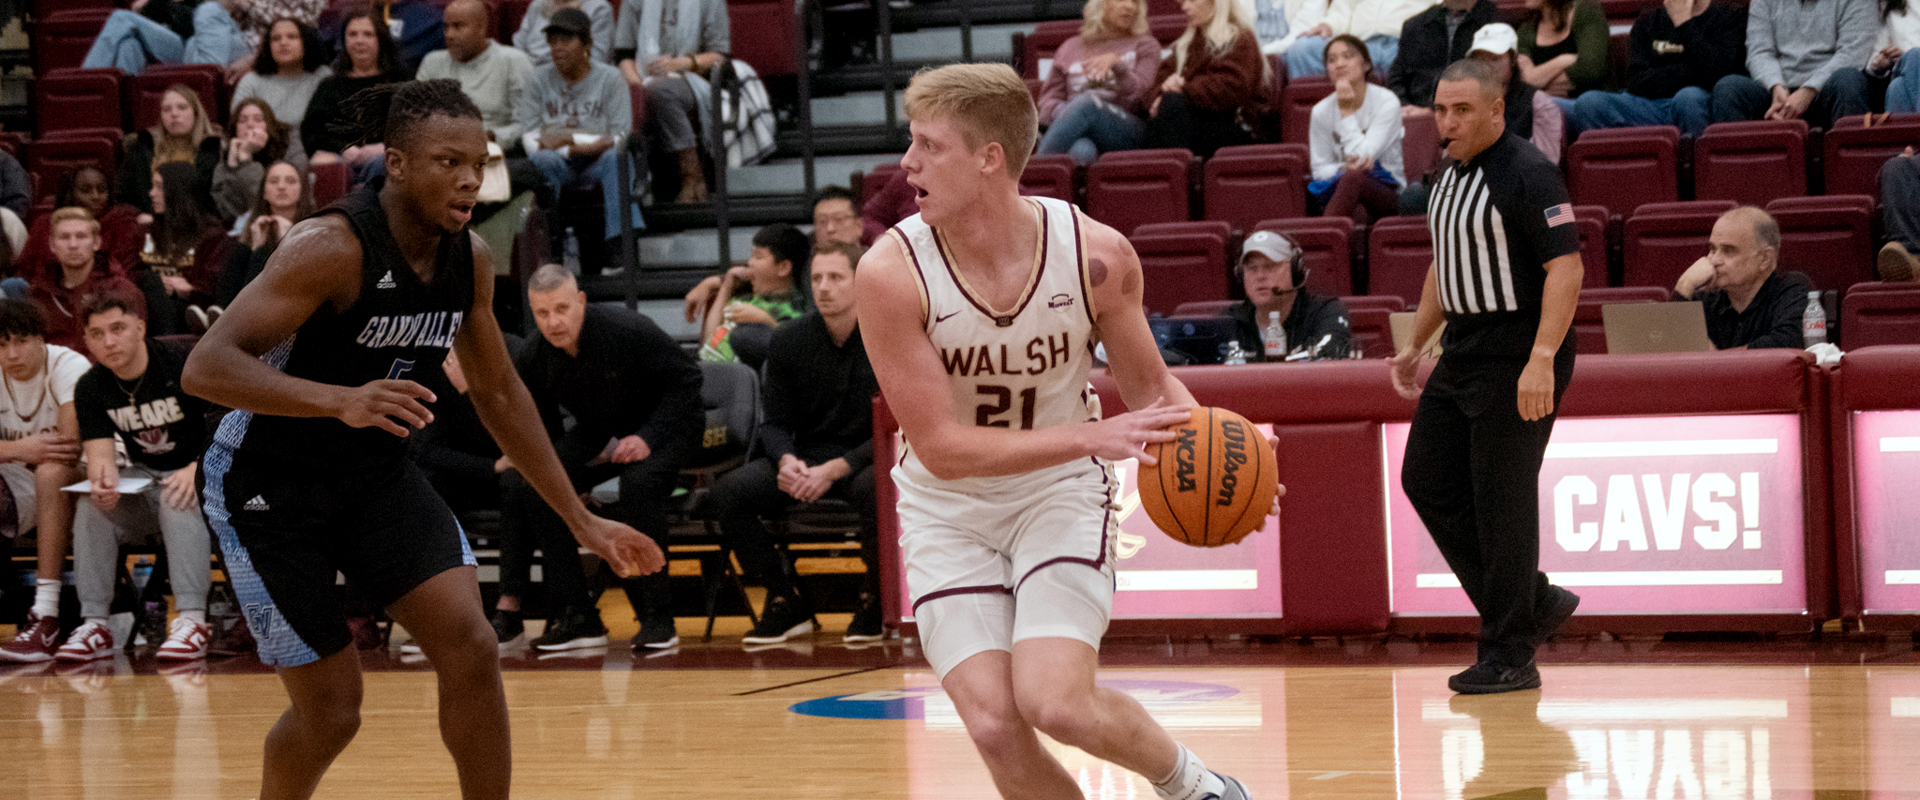 photo of the Walsh men's basketball team in action on the court